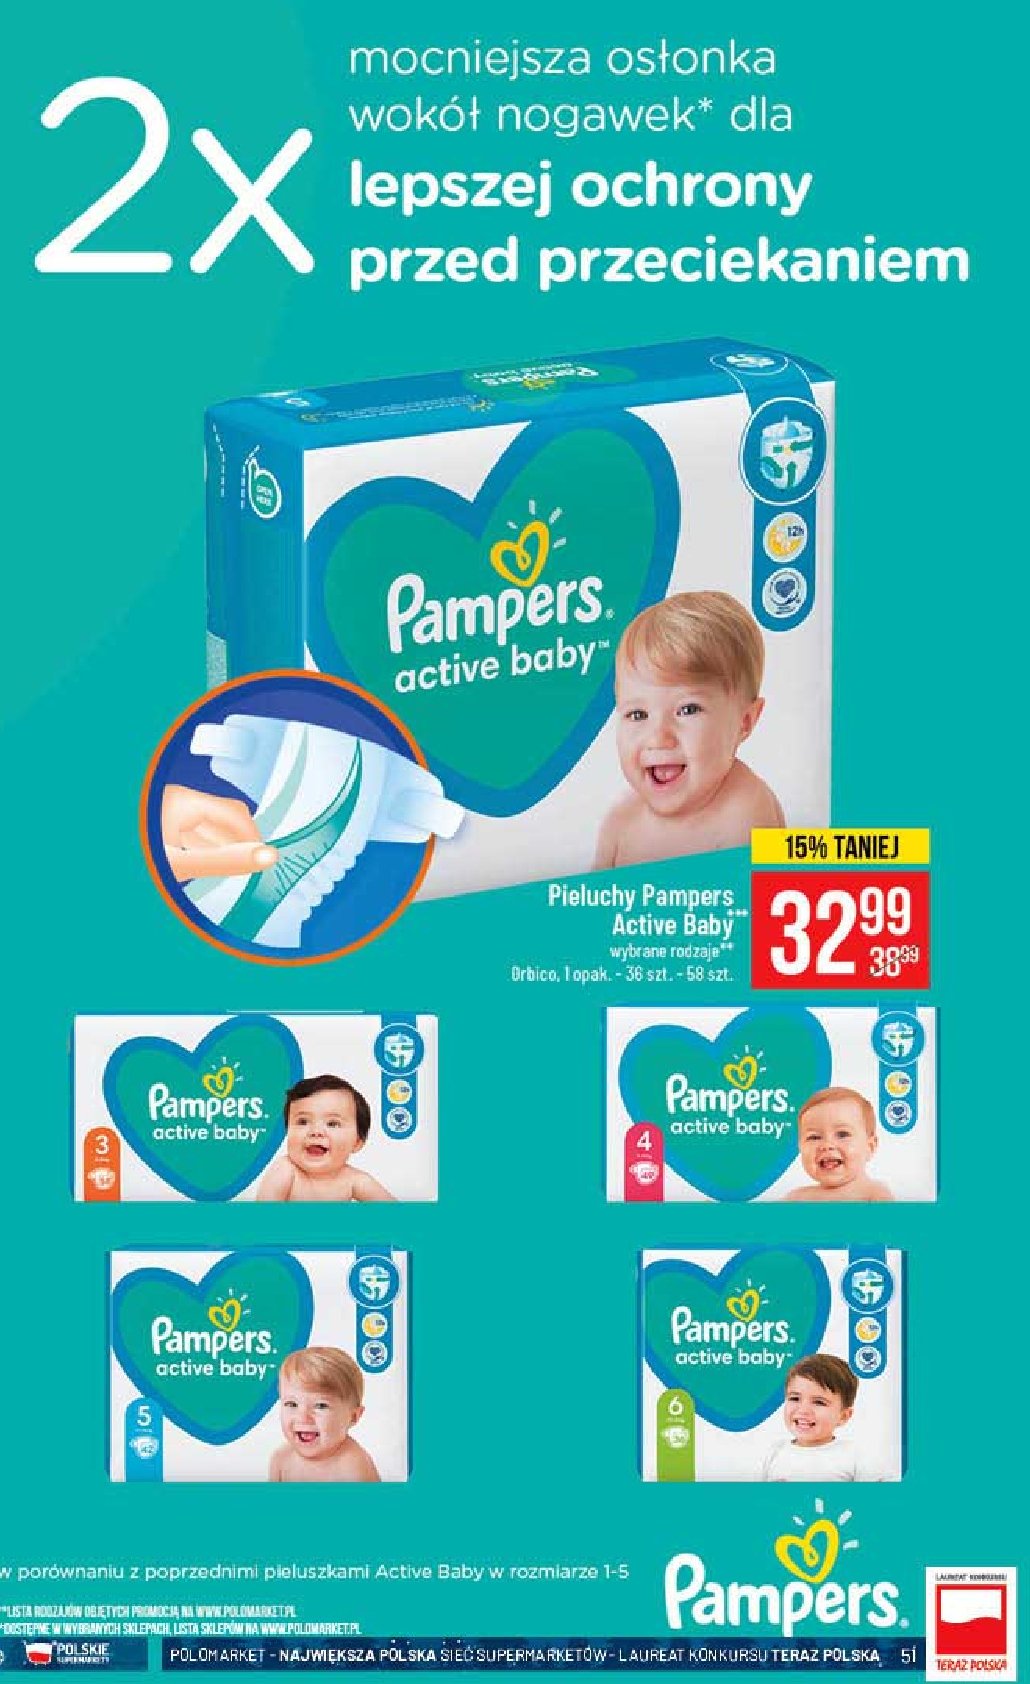 Pieluchy extra large Pampers active baby promocja